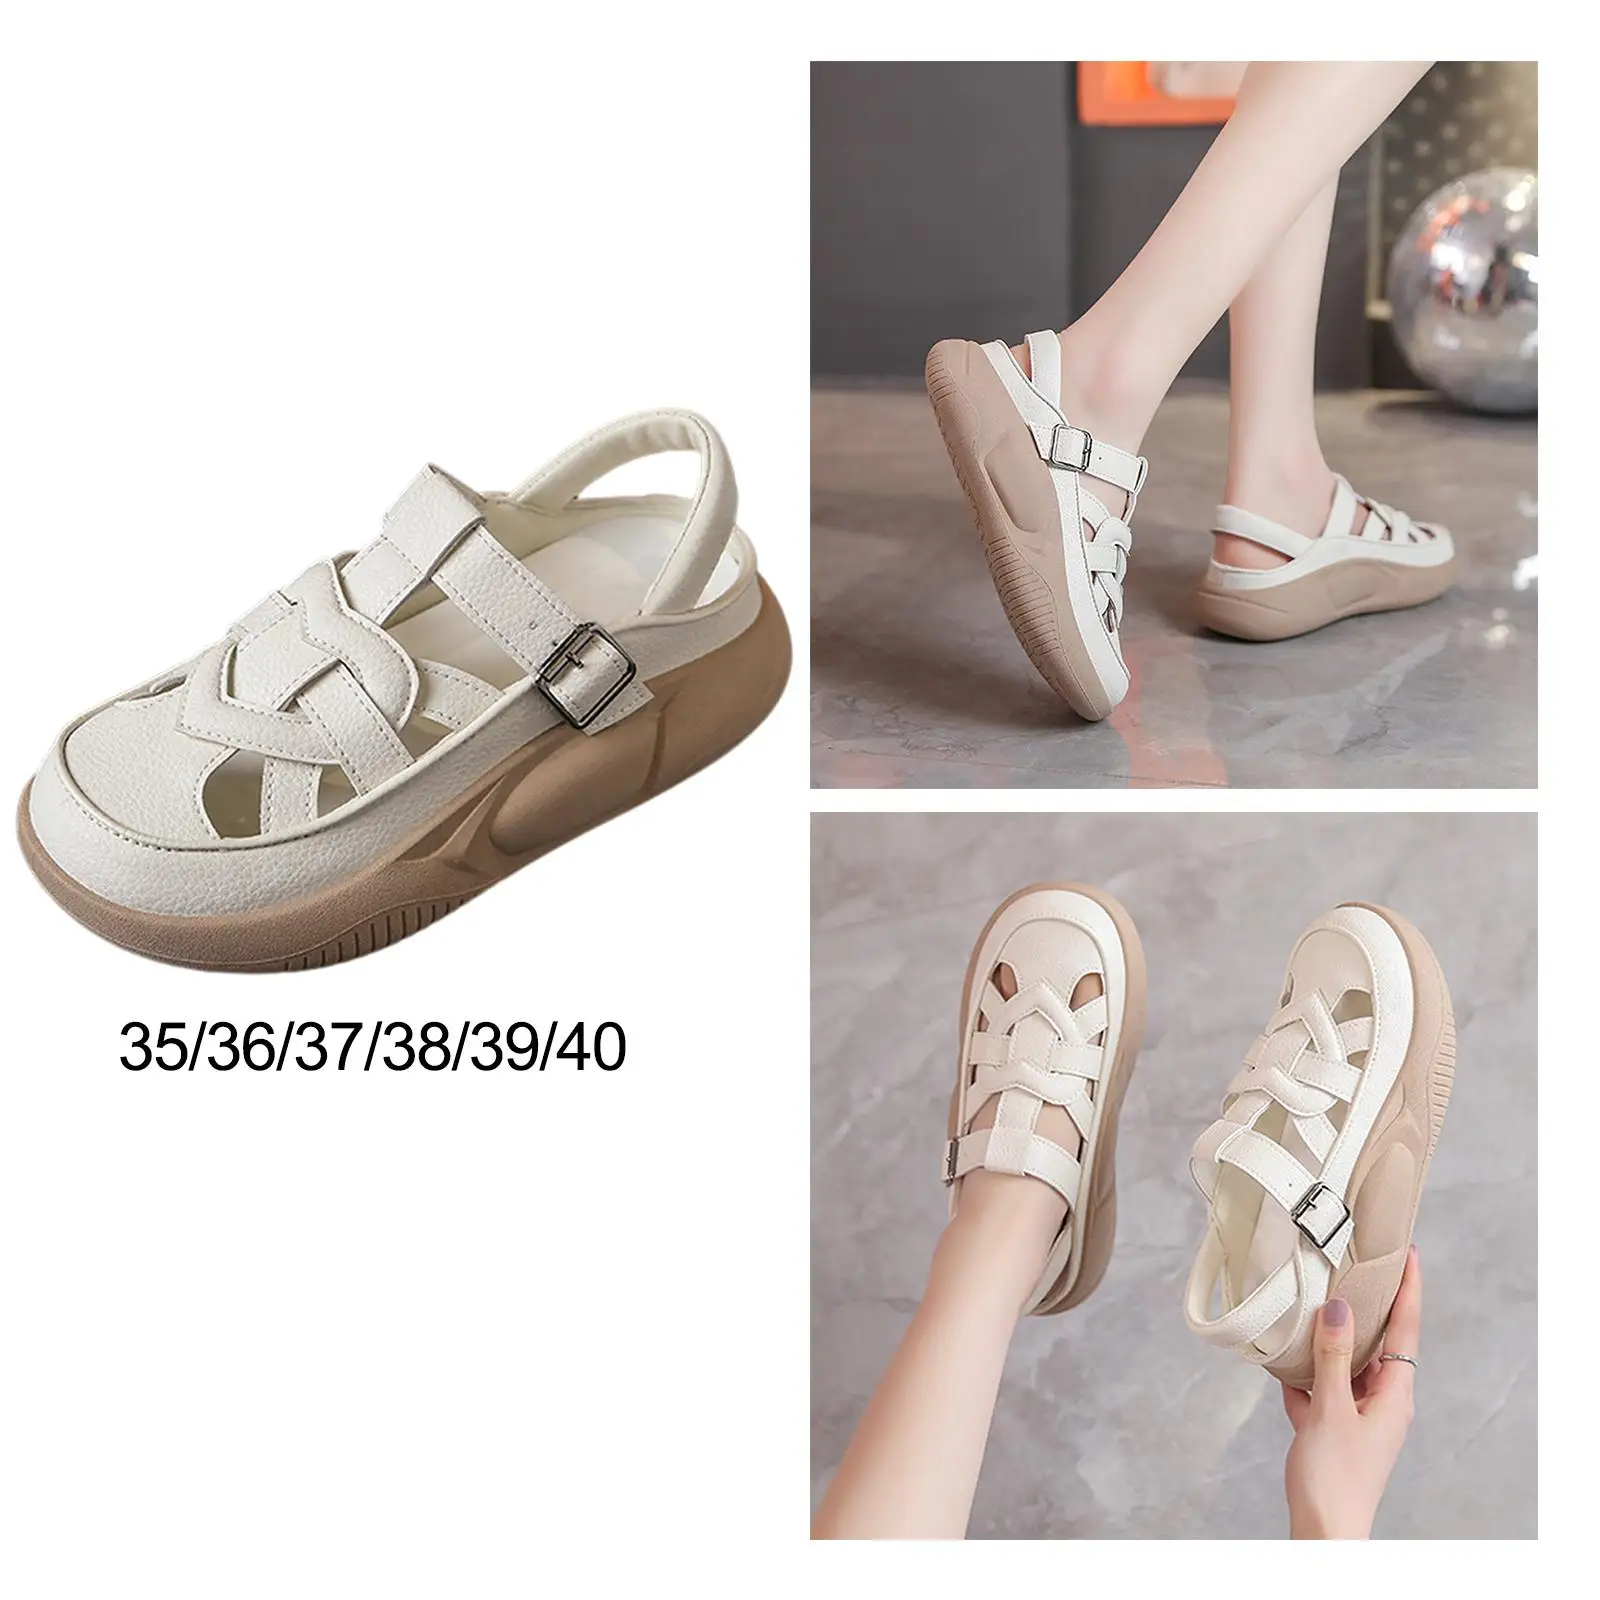 Women`s Platform Sandals Fashion Non Slip Lightweight Breathable PU Sandals for Trips Dating Walking Leisure Activities Shopping